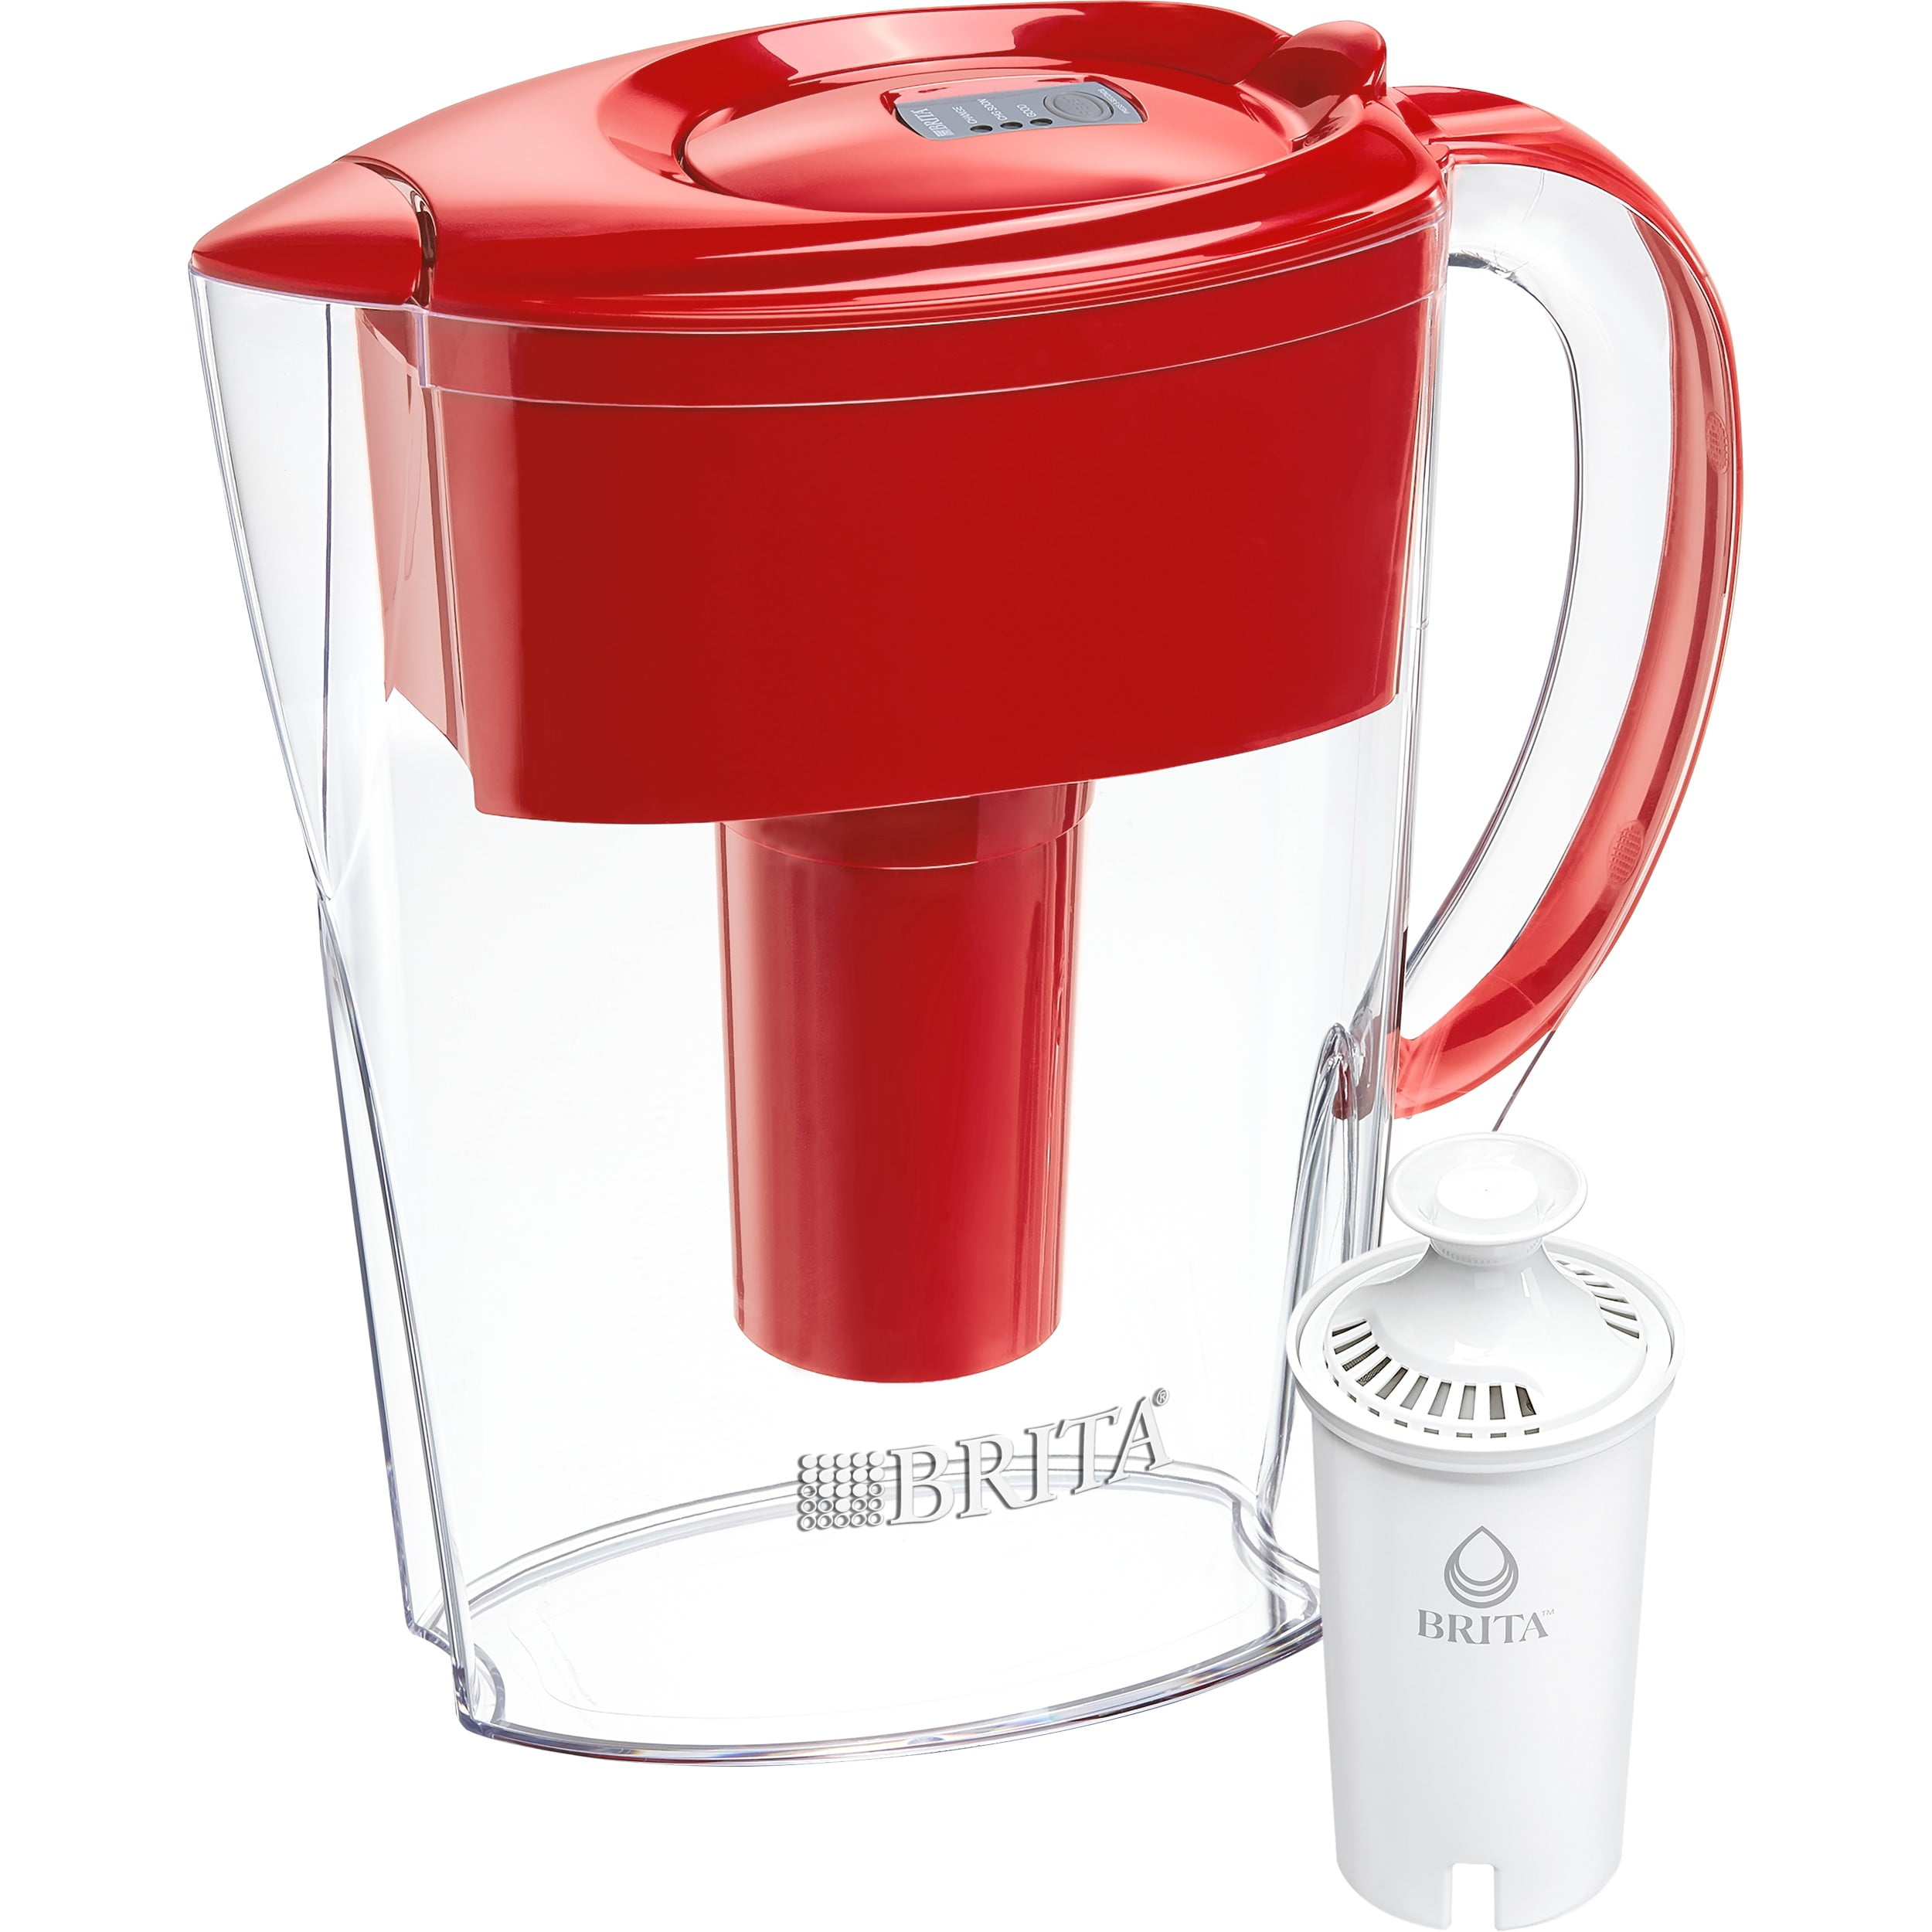 Brita Small 6 Cup Space Saver Water Filter Pitcher with 1 Standard Filter, Space Saver, Red